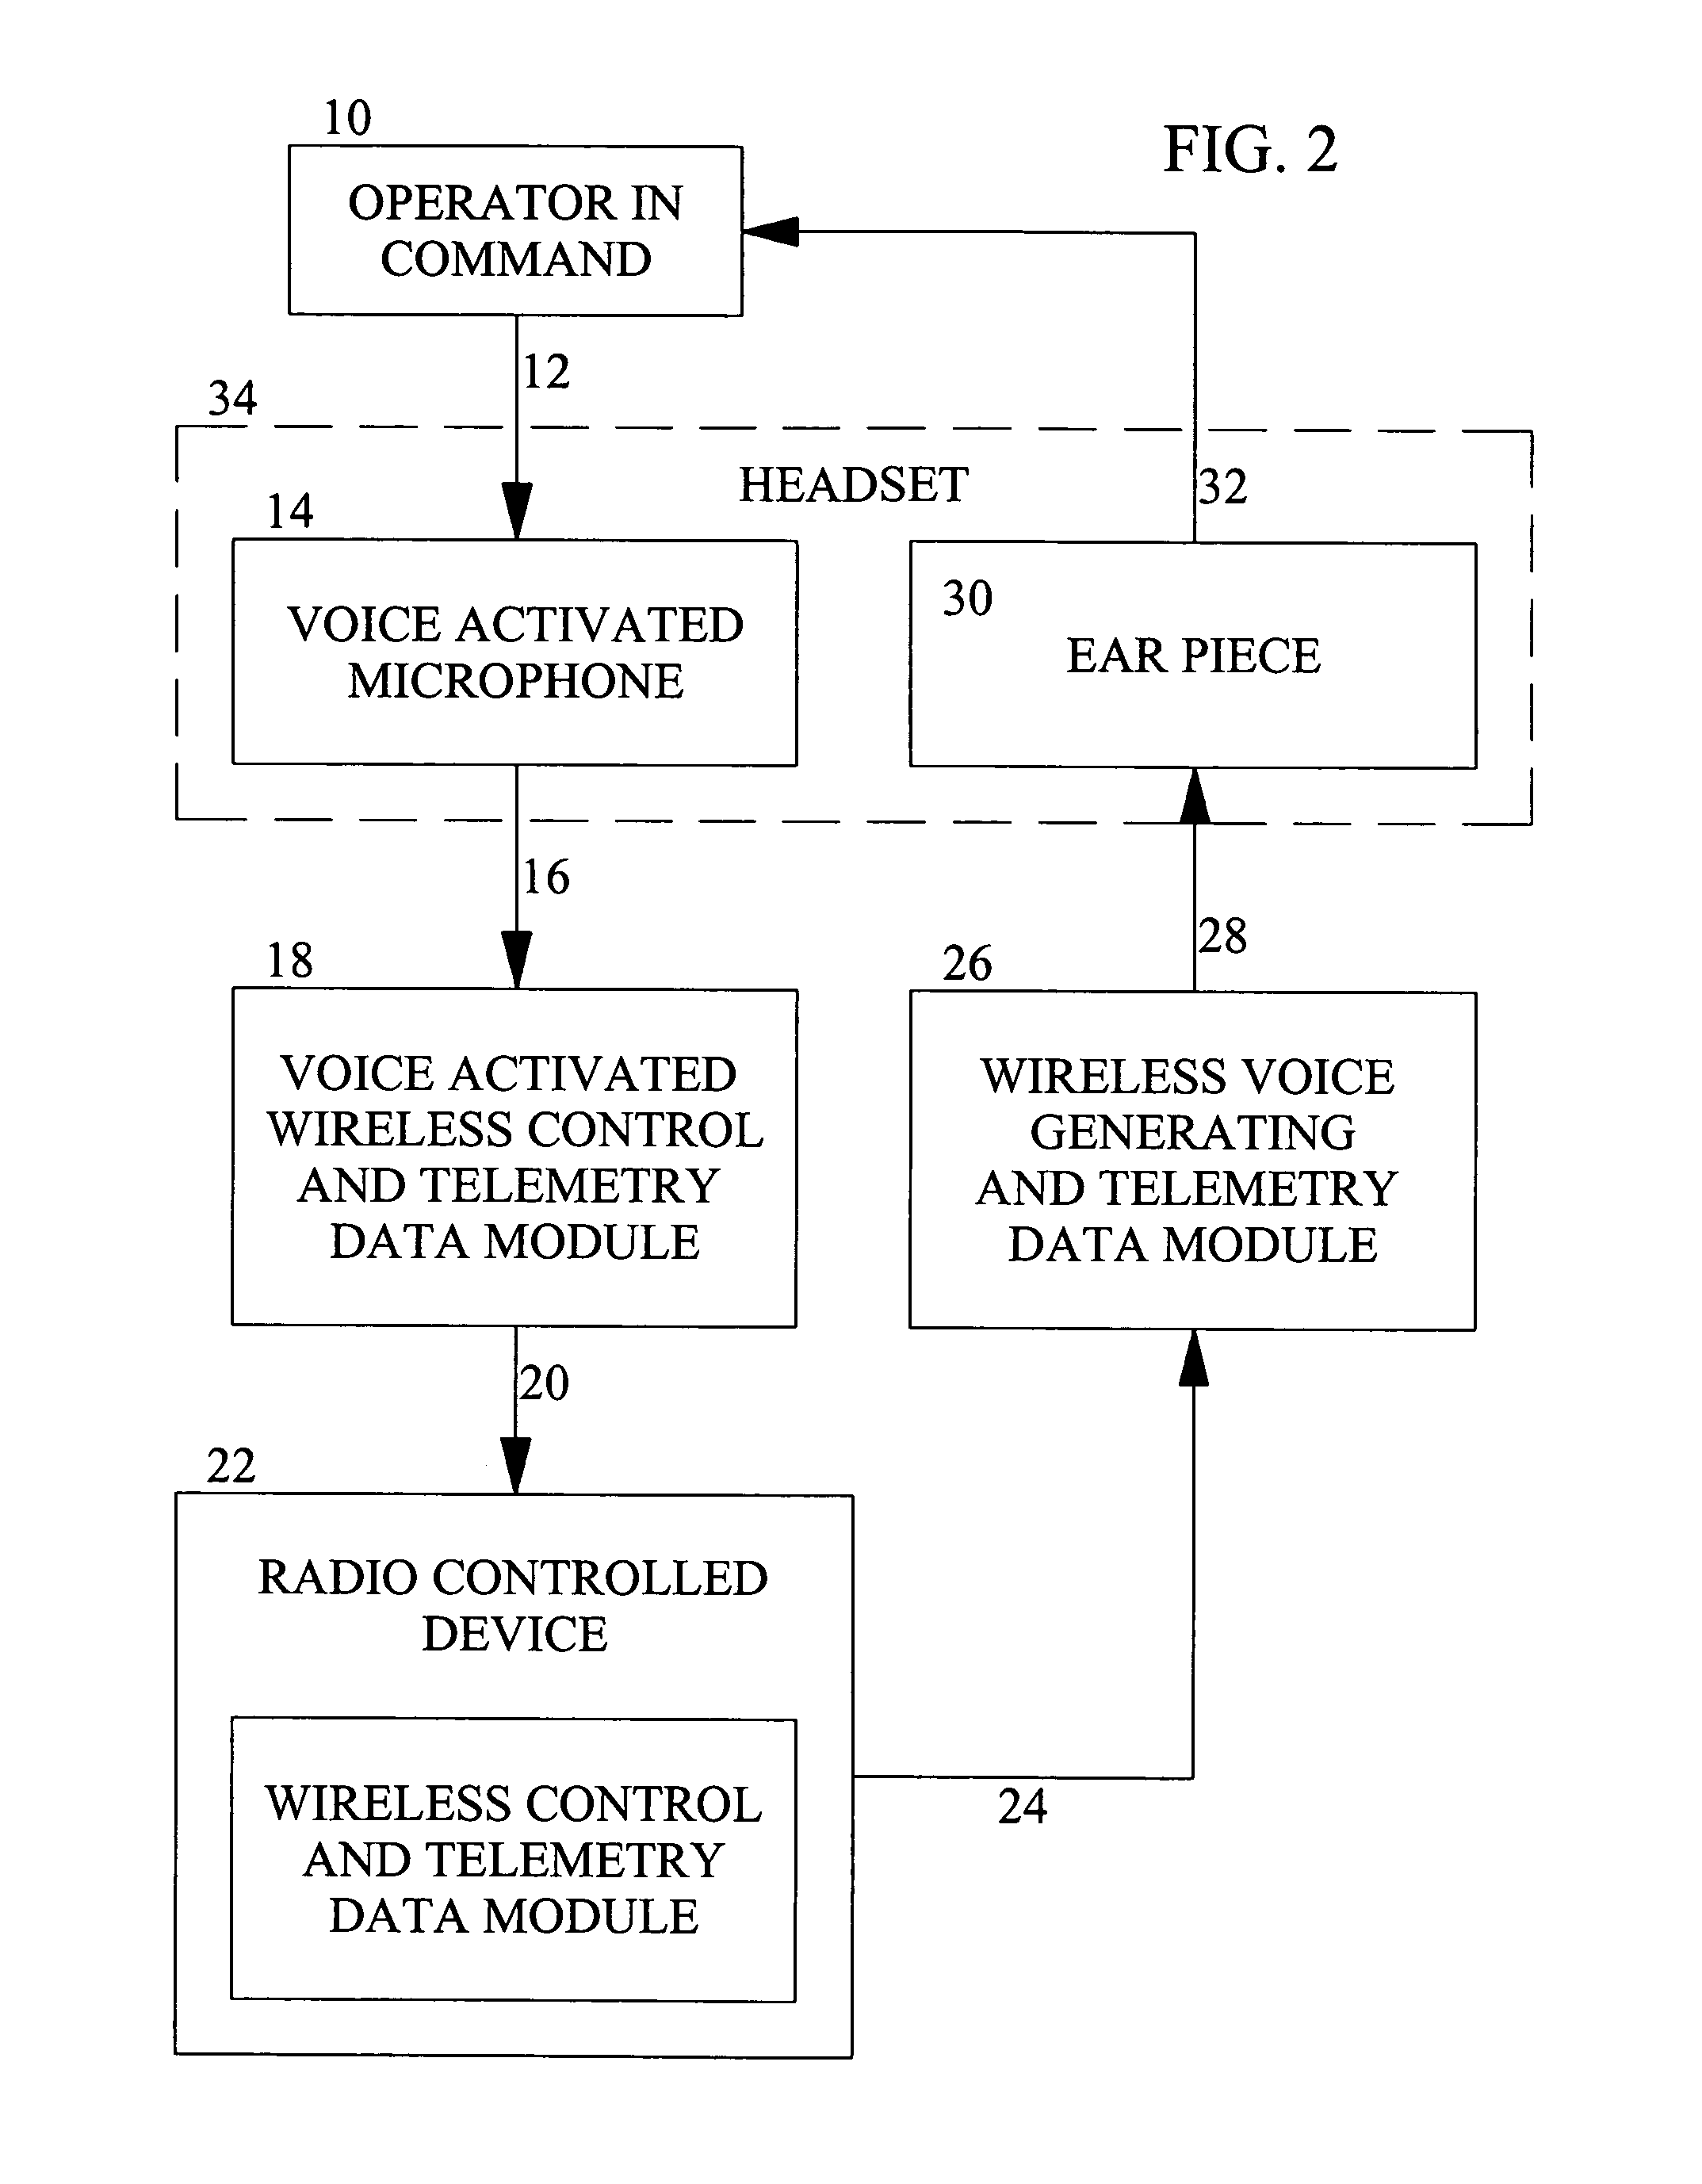 Voice-activated command and control for remotely controlled model vehicles